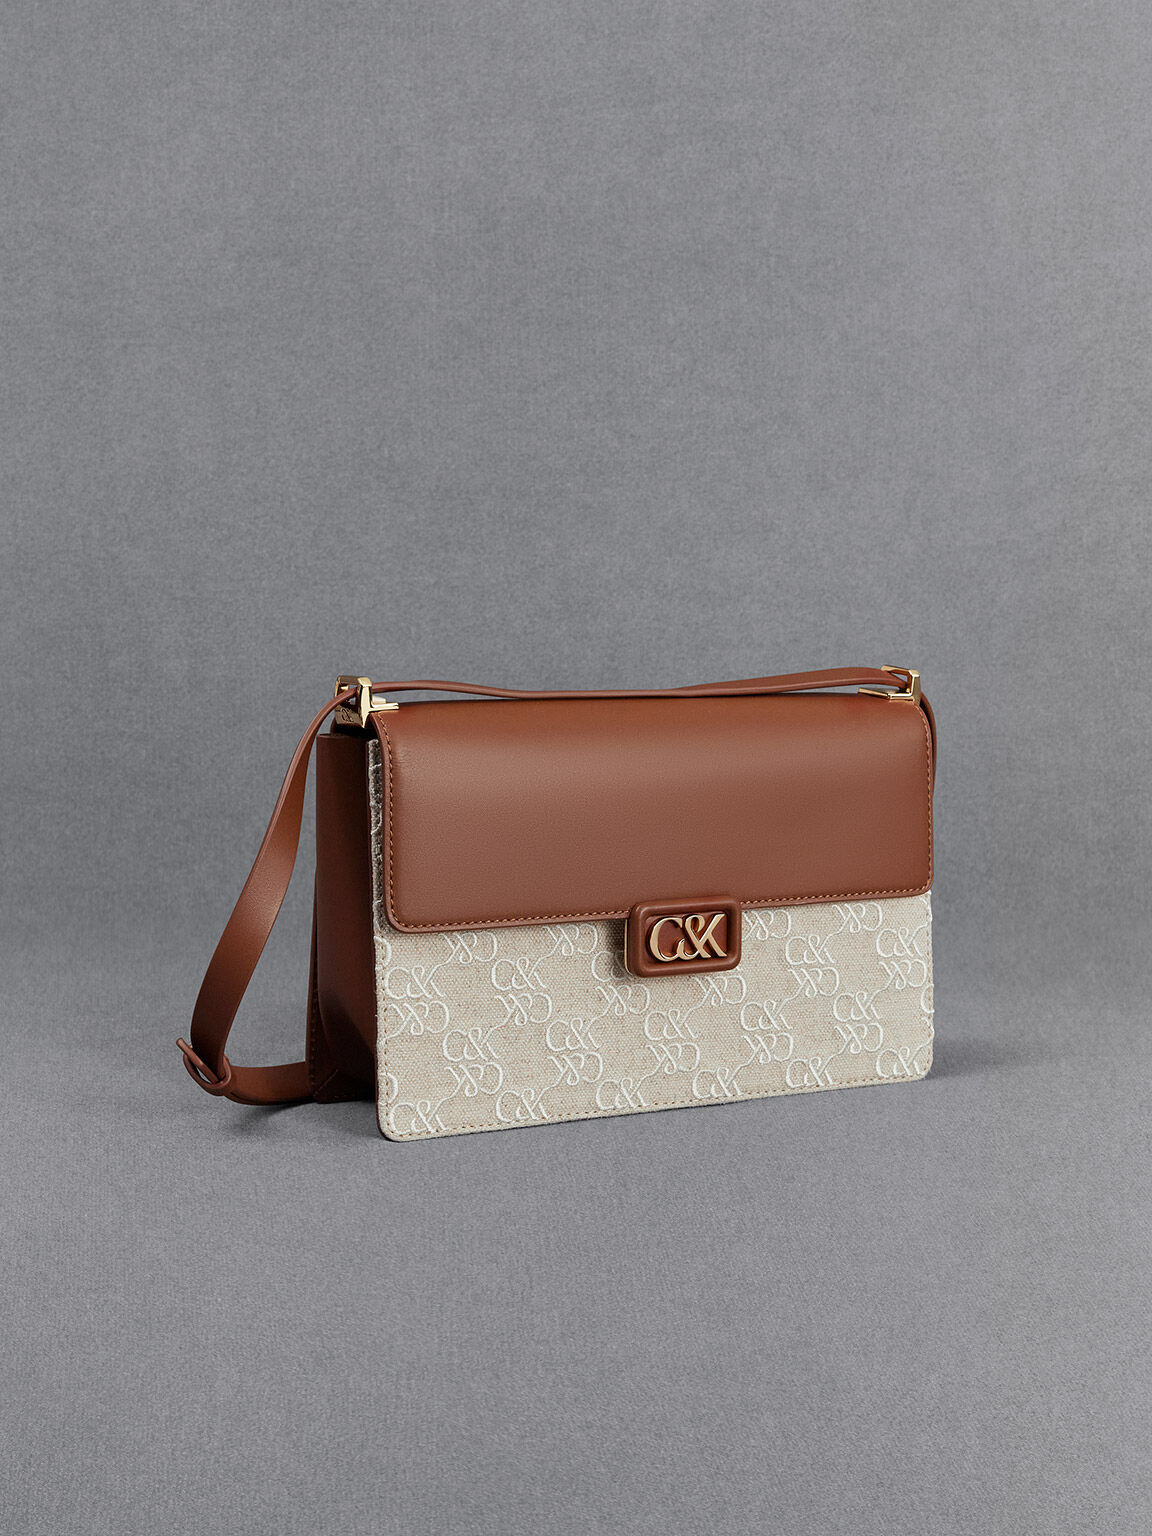 Women's Shoulder Bags | Exclusive Styles | CHARLES & KEITH International